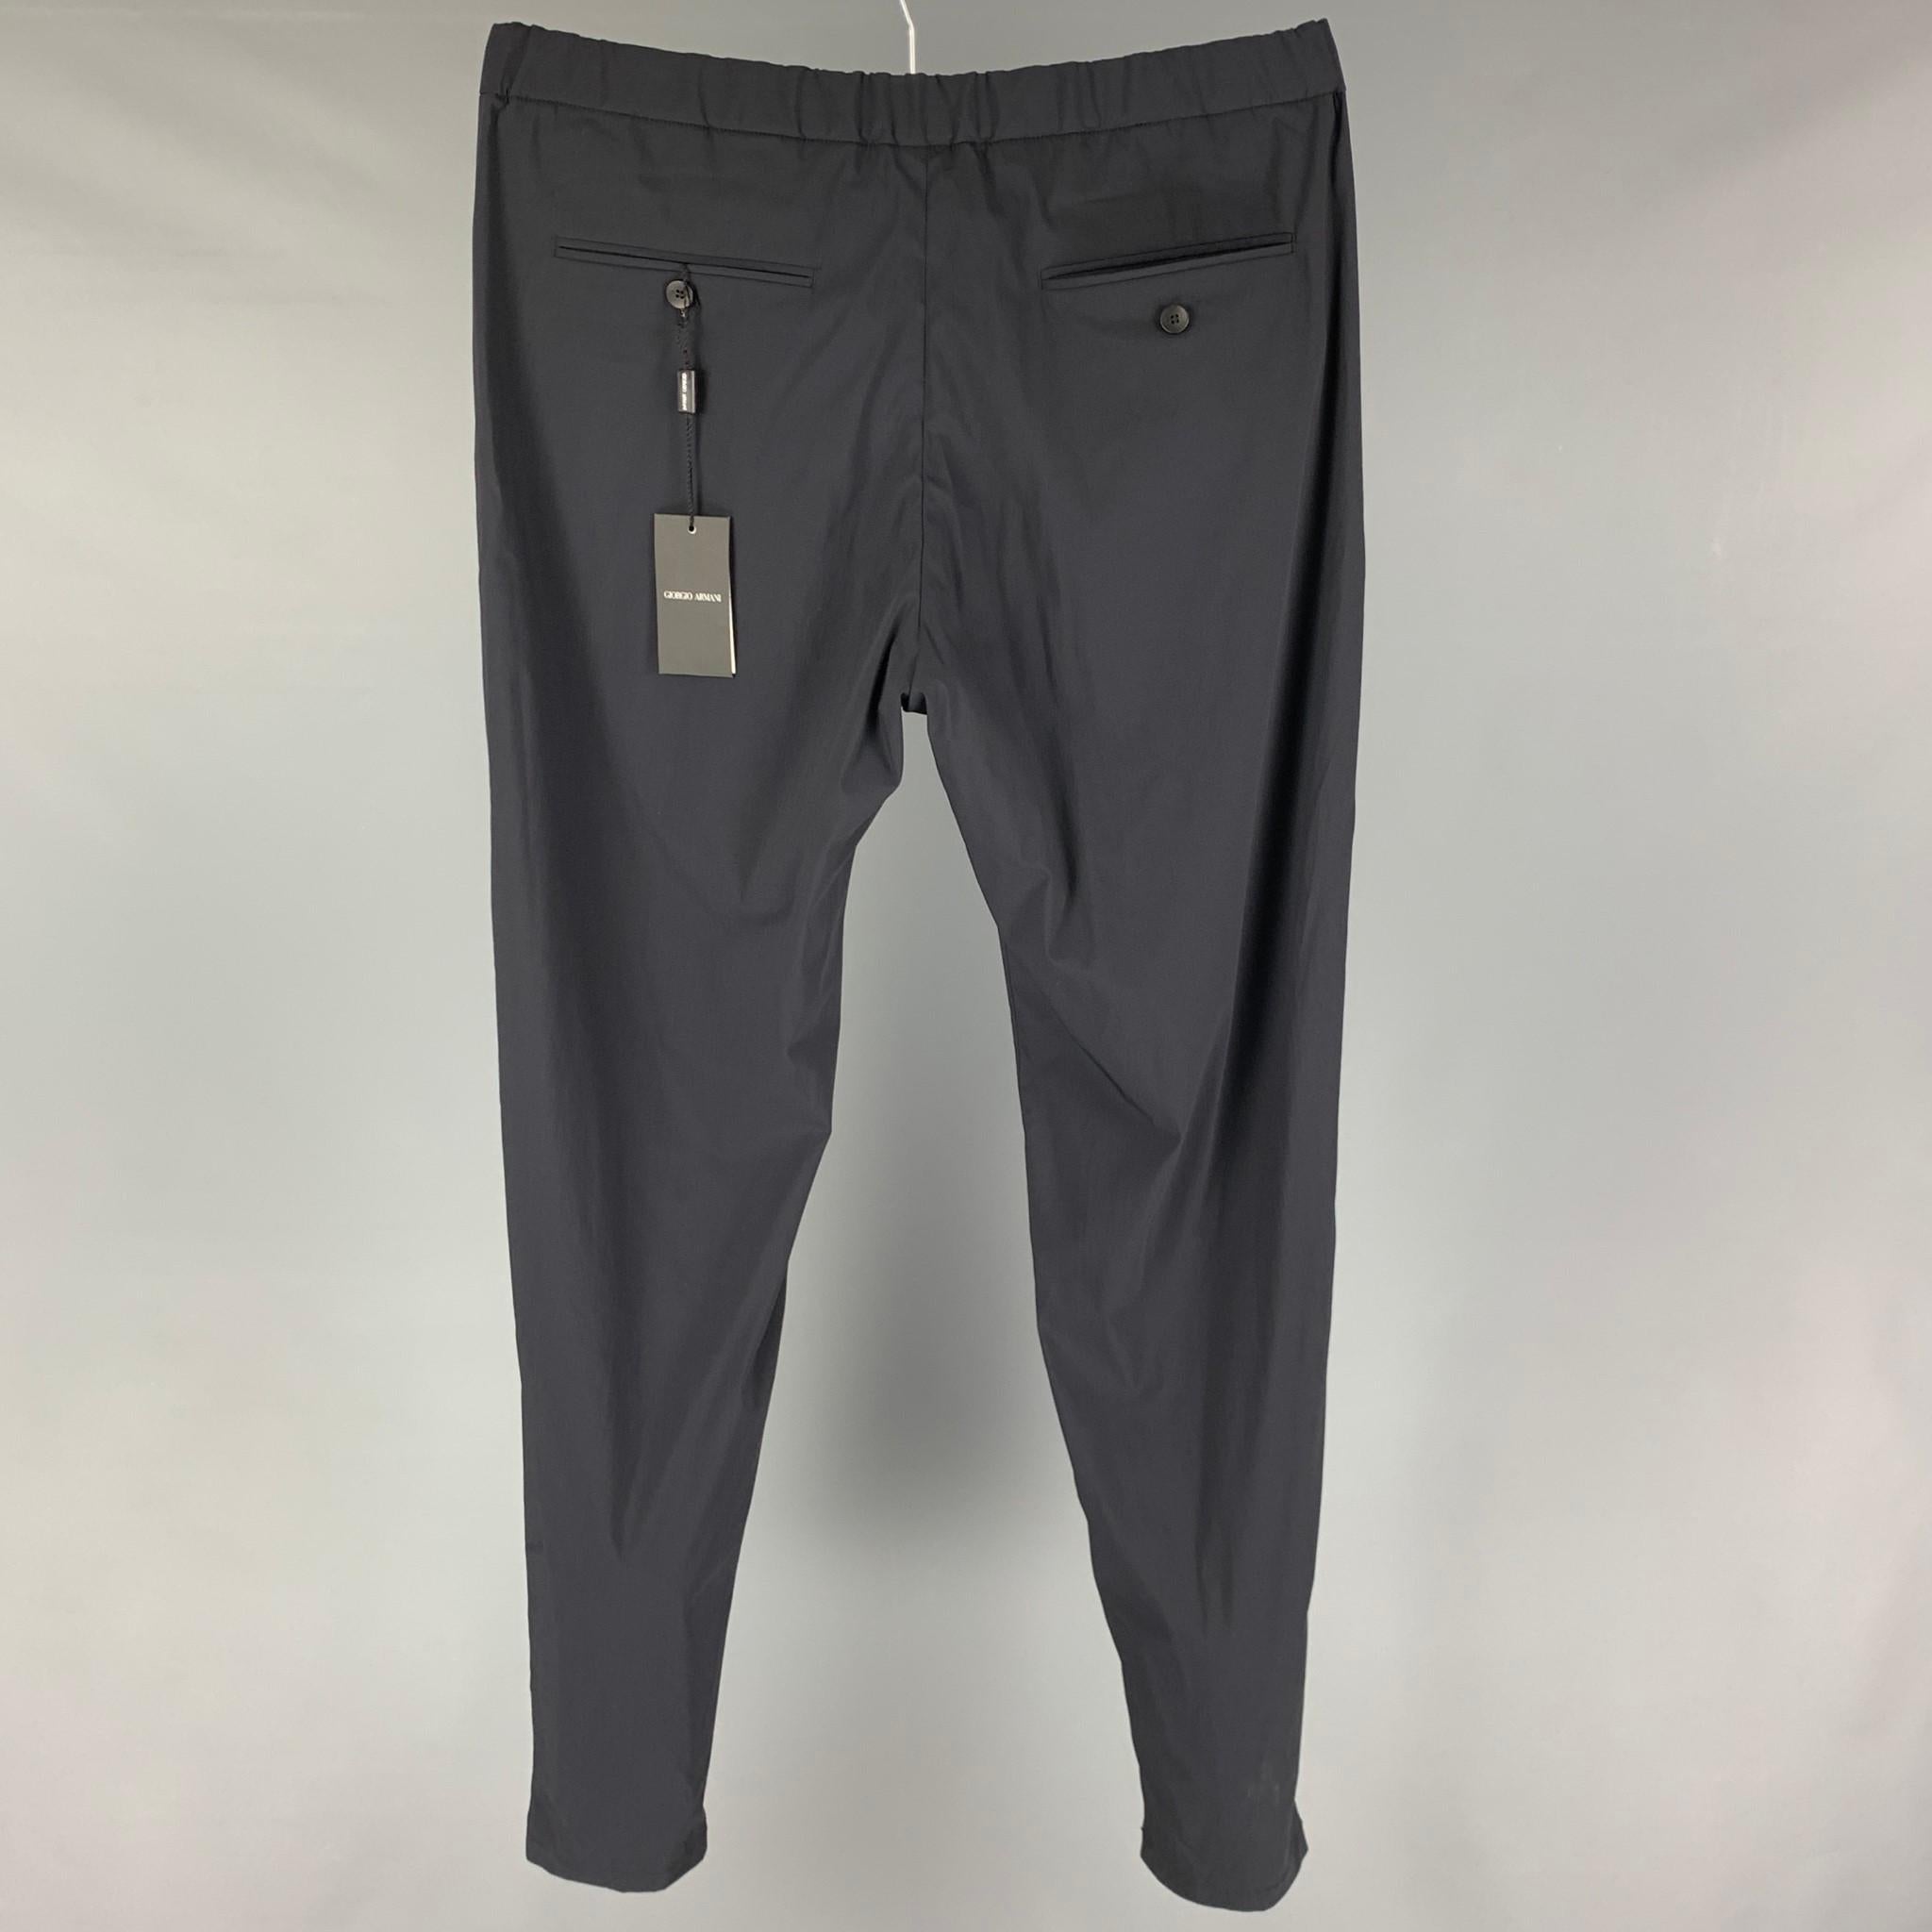 GIORGIO ARMANI dress pants comes in a navy wool blend featuring a slim fit, elastic waistband, front tab, and a zip fly closure. Made in Italy. 

New with tags.
Marked: 50
Original Retail Price: $745.00

Measurements:

Waist: 34 in.
Rise: 11